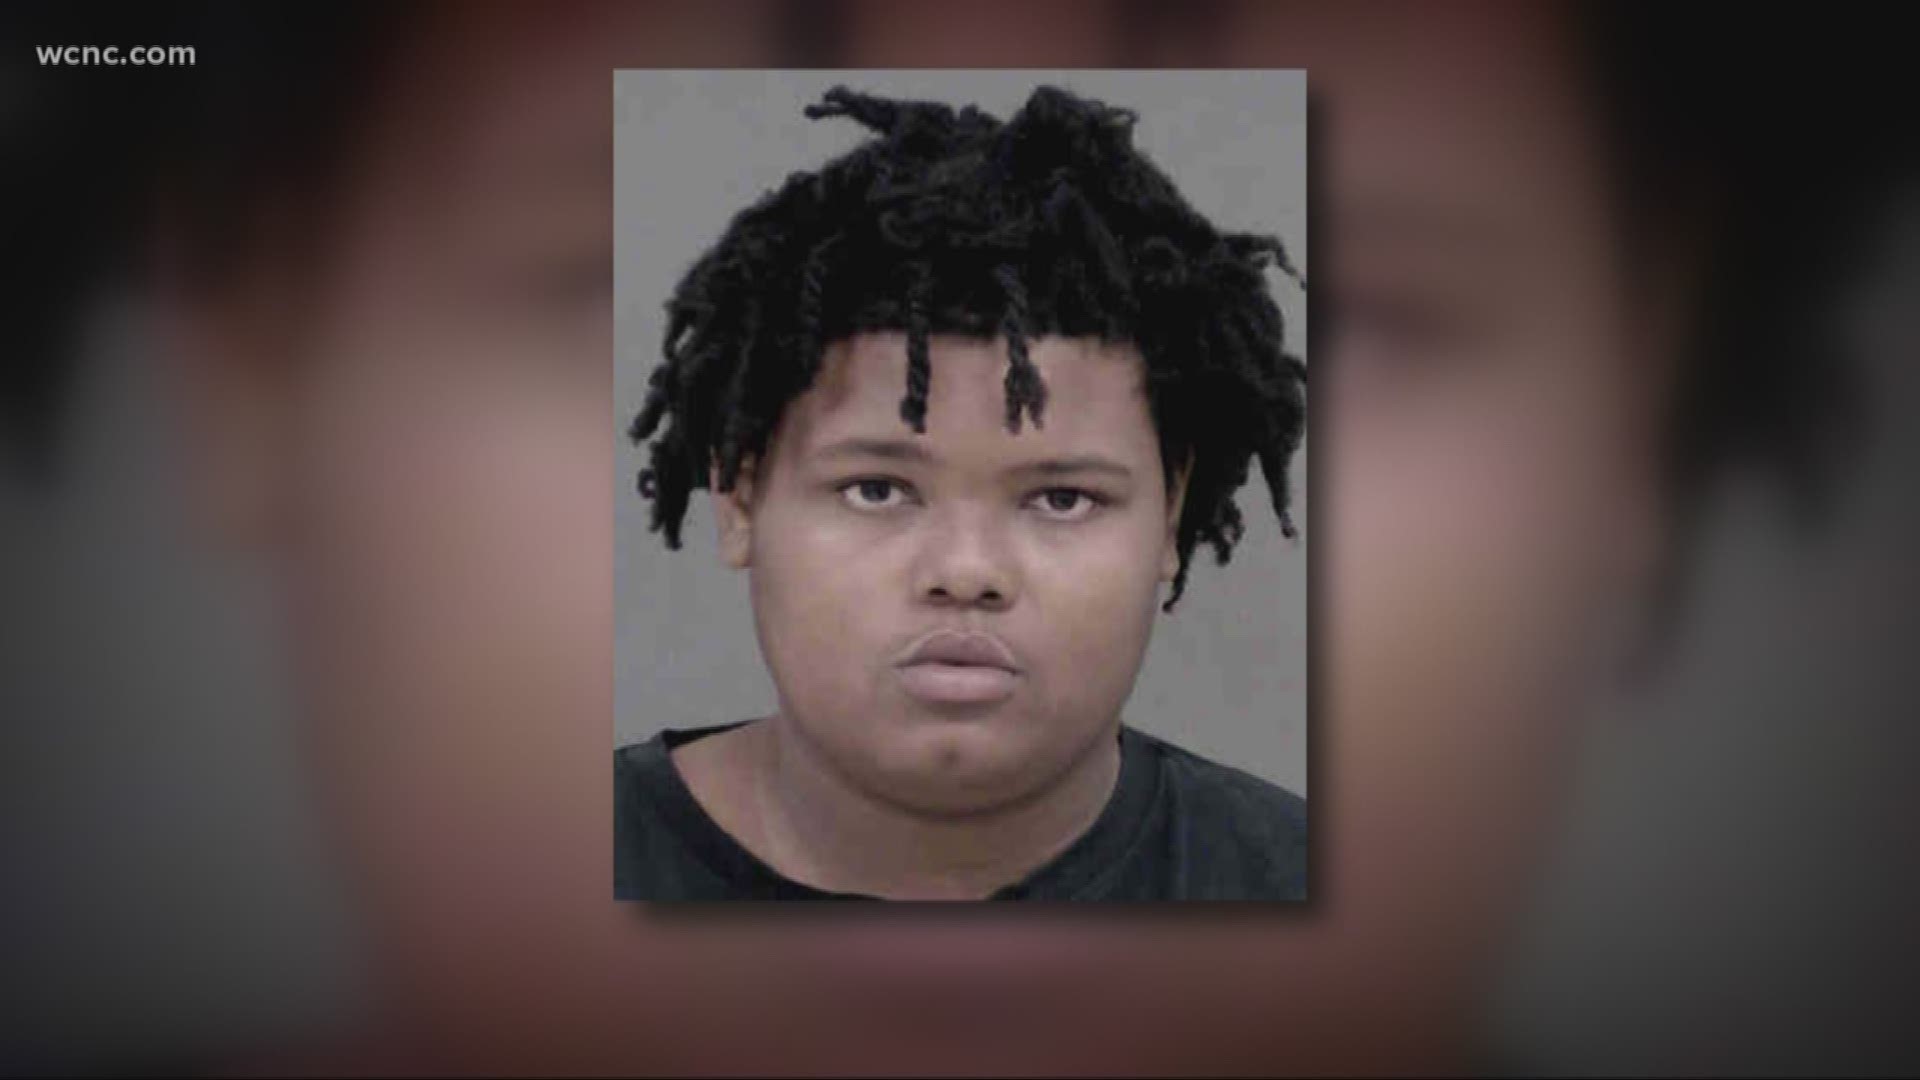 CMPD said they've made a third arrest in the shooting of a 15-year-old. 18-year old Jaziah Graham now faces charges. The other two suspects in the shooting were arrested Saturday morning.